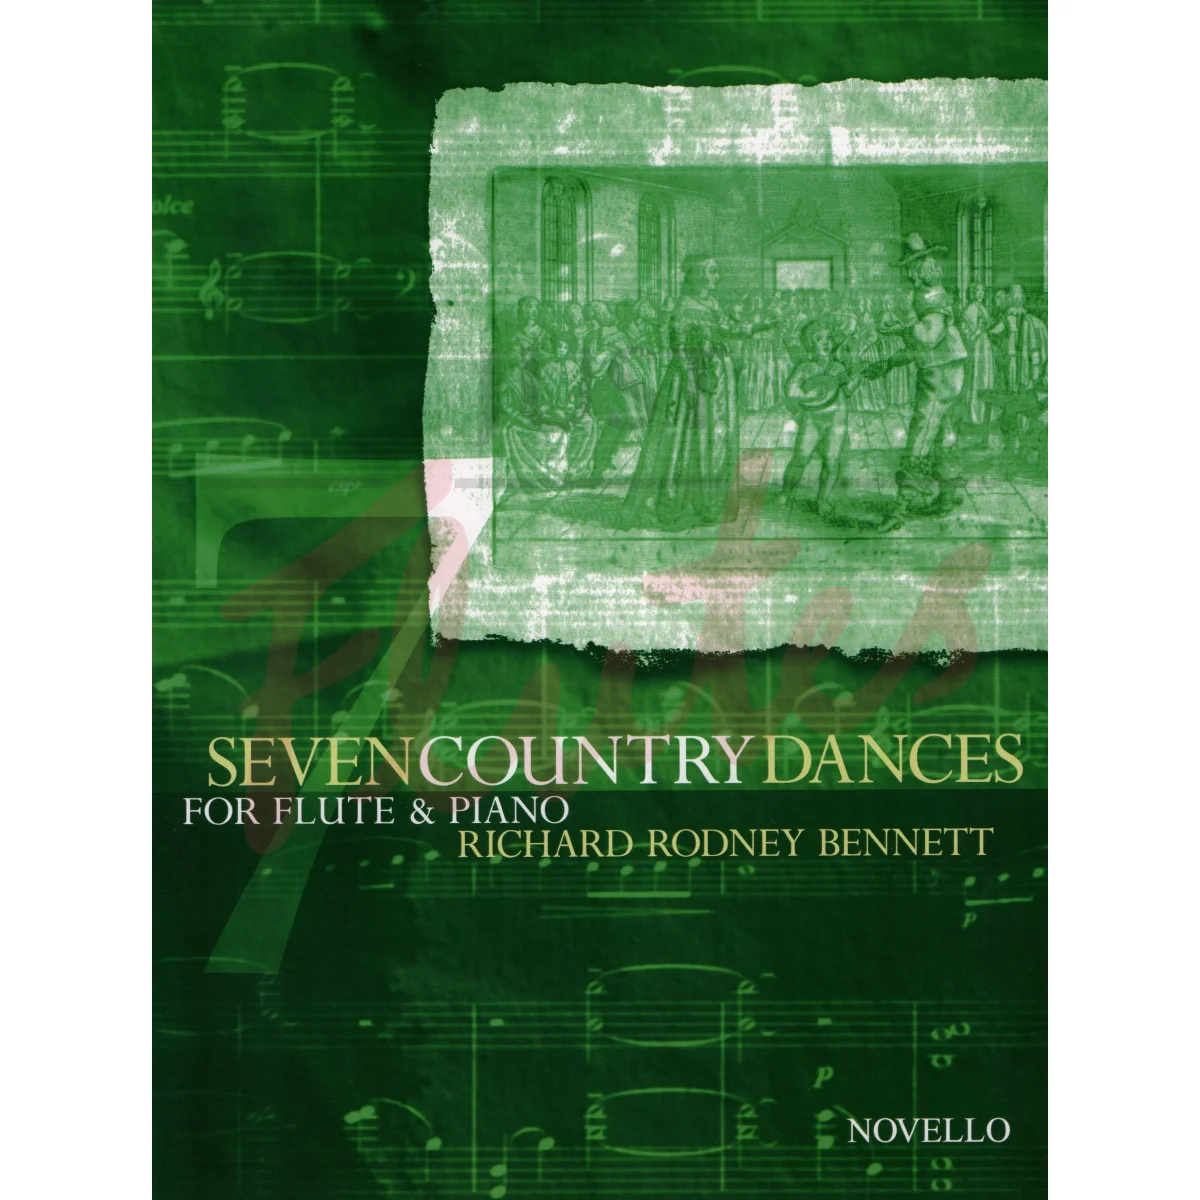 Seven Country Dances for Flute and Piano